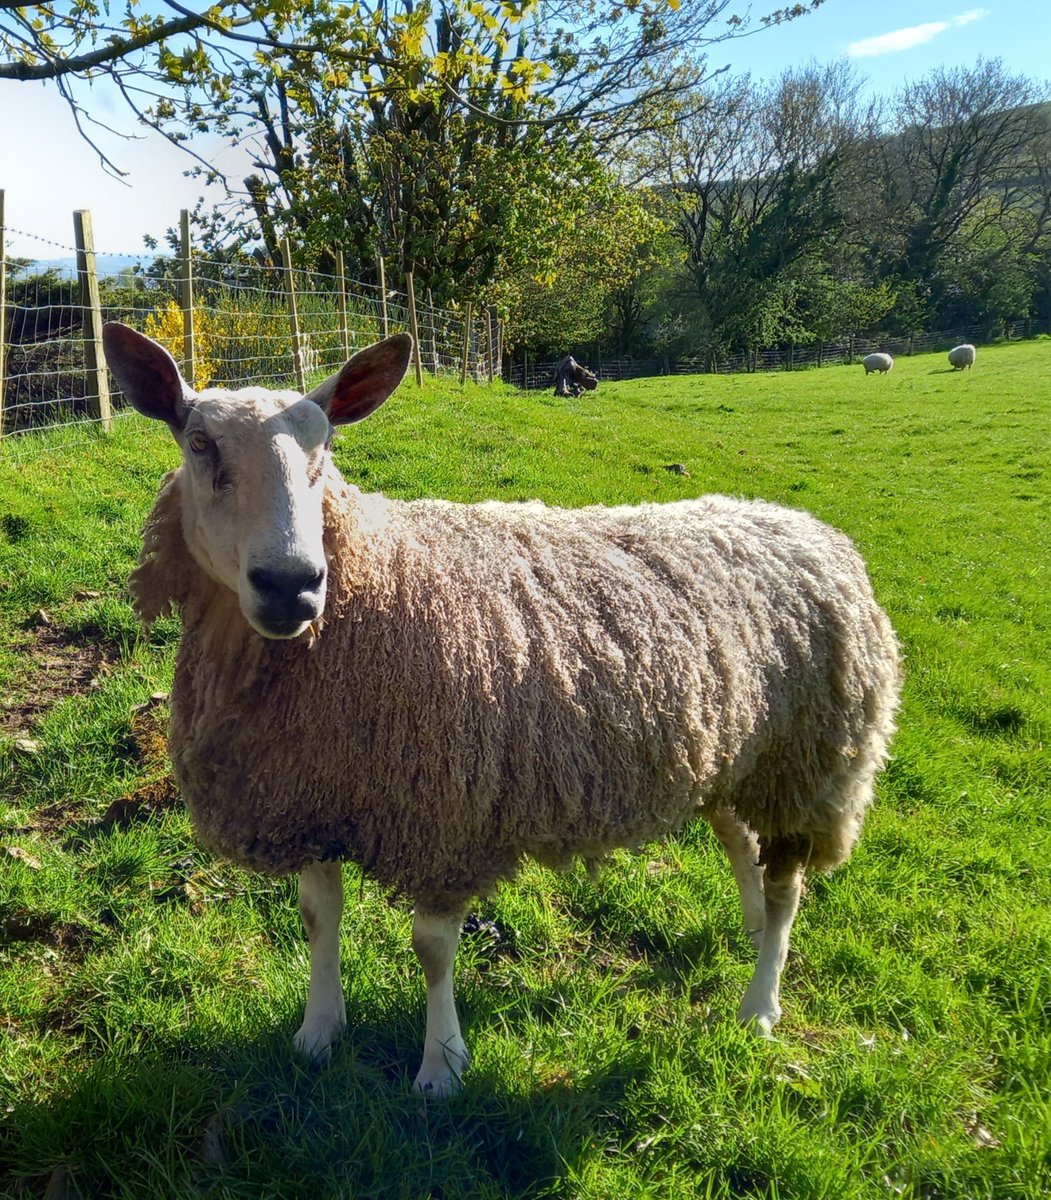 A sheep a day in May 

💖 ⭐️ Alia ⭐️💖

#animalsanctuary #sheep365 #sheep #bluefacedleicester #thechampion #fleece #wool #nonprofit #Amazonwishlist #foreverhome #animallovers 
#sponsorasheep

woollypatchworkshe.wixsite.com/website